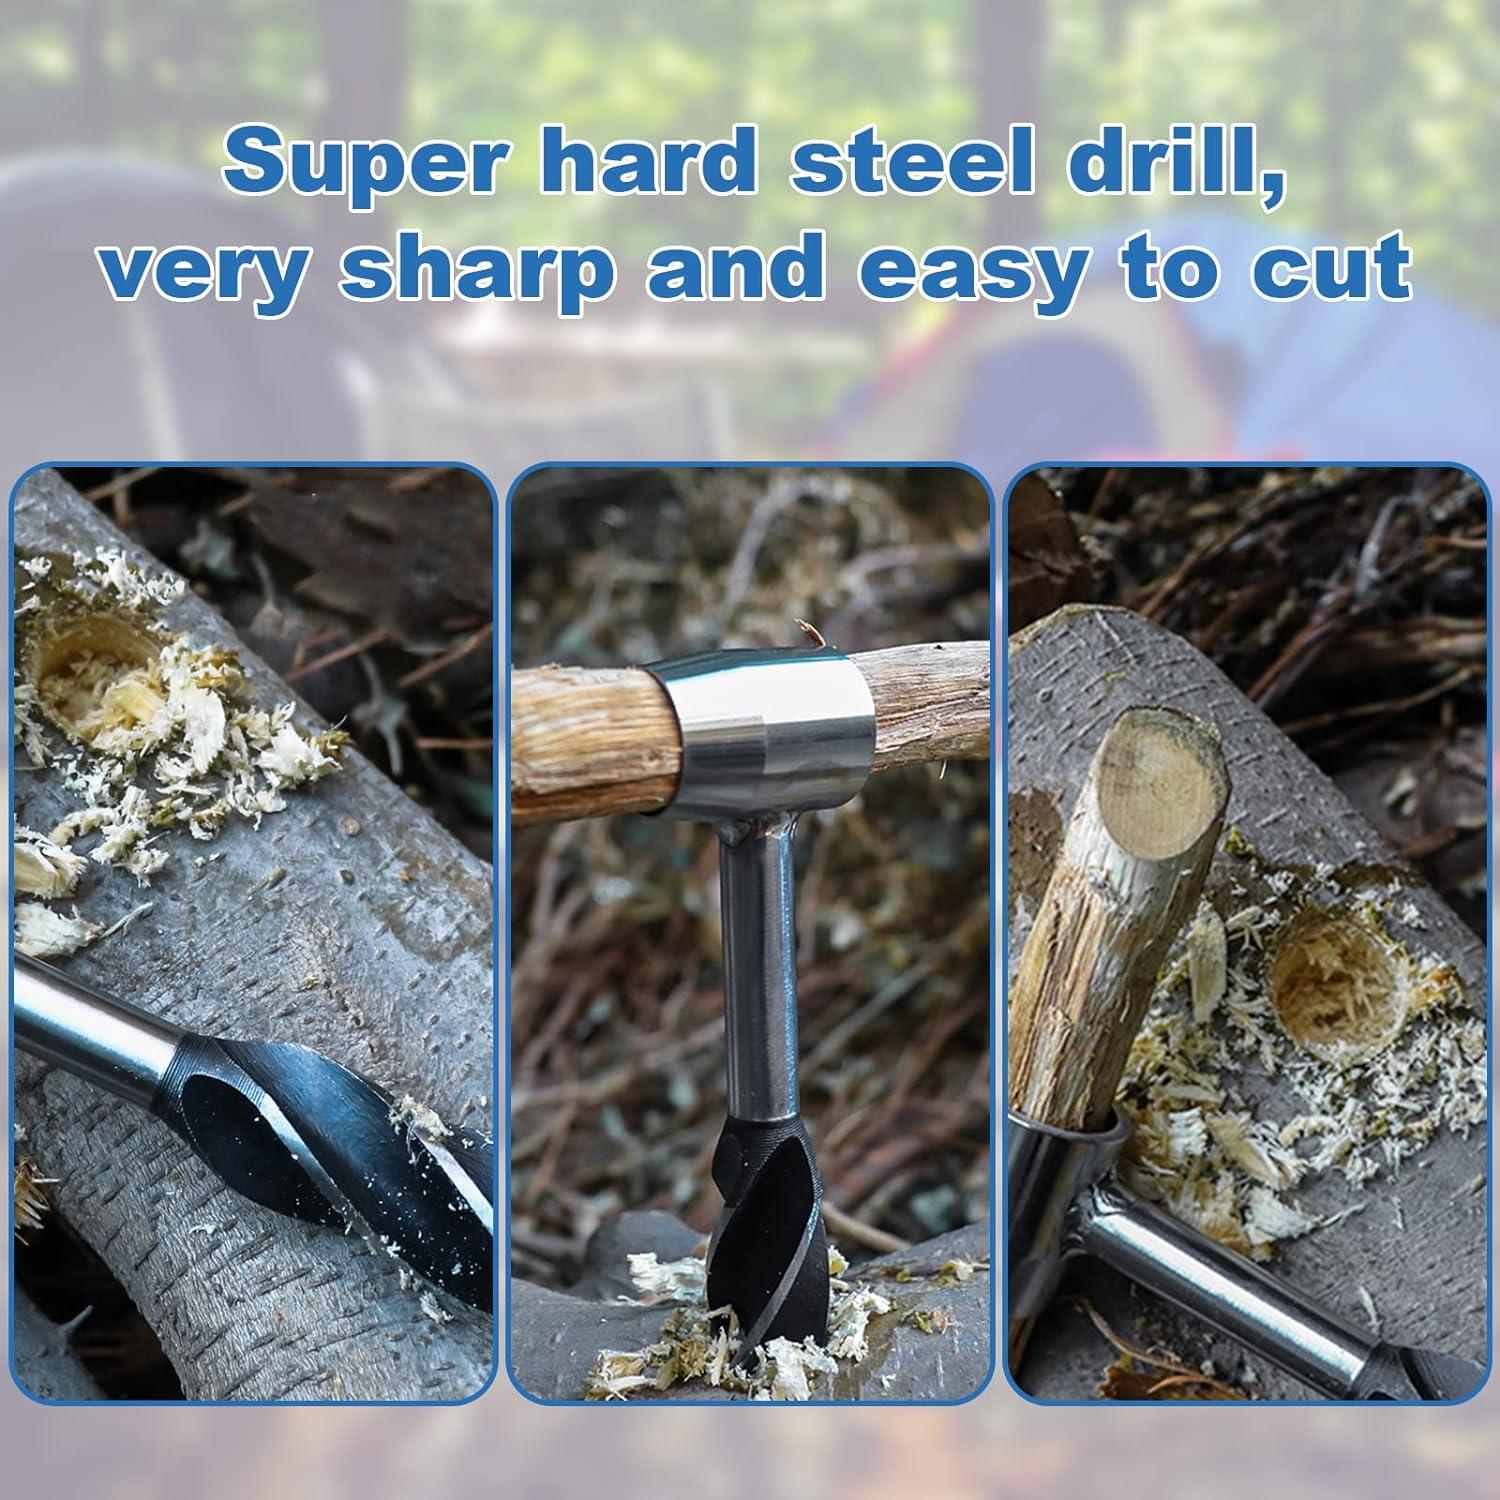  Survival Settlers Tool Bushcraft Gear and Equipment,Bushcraft  Hand Auger Wrench for Camping and Outdoor Backpacking Scotch Eye Wood Auger  Drill Bit Wood Peg and Hole Maker Multi Tool with Sheath 